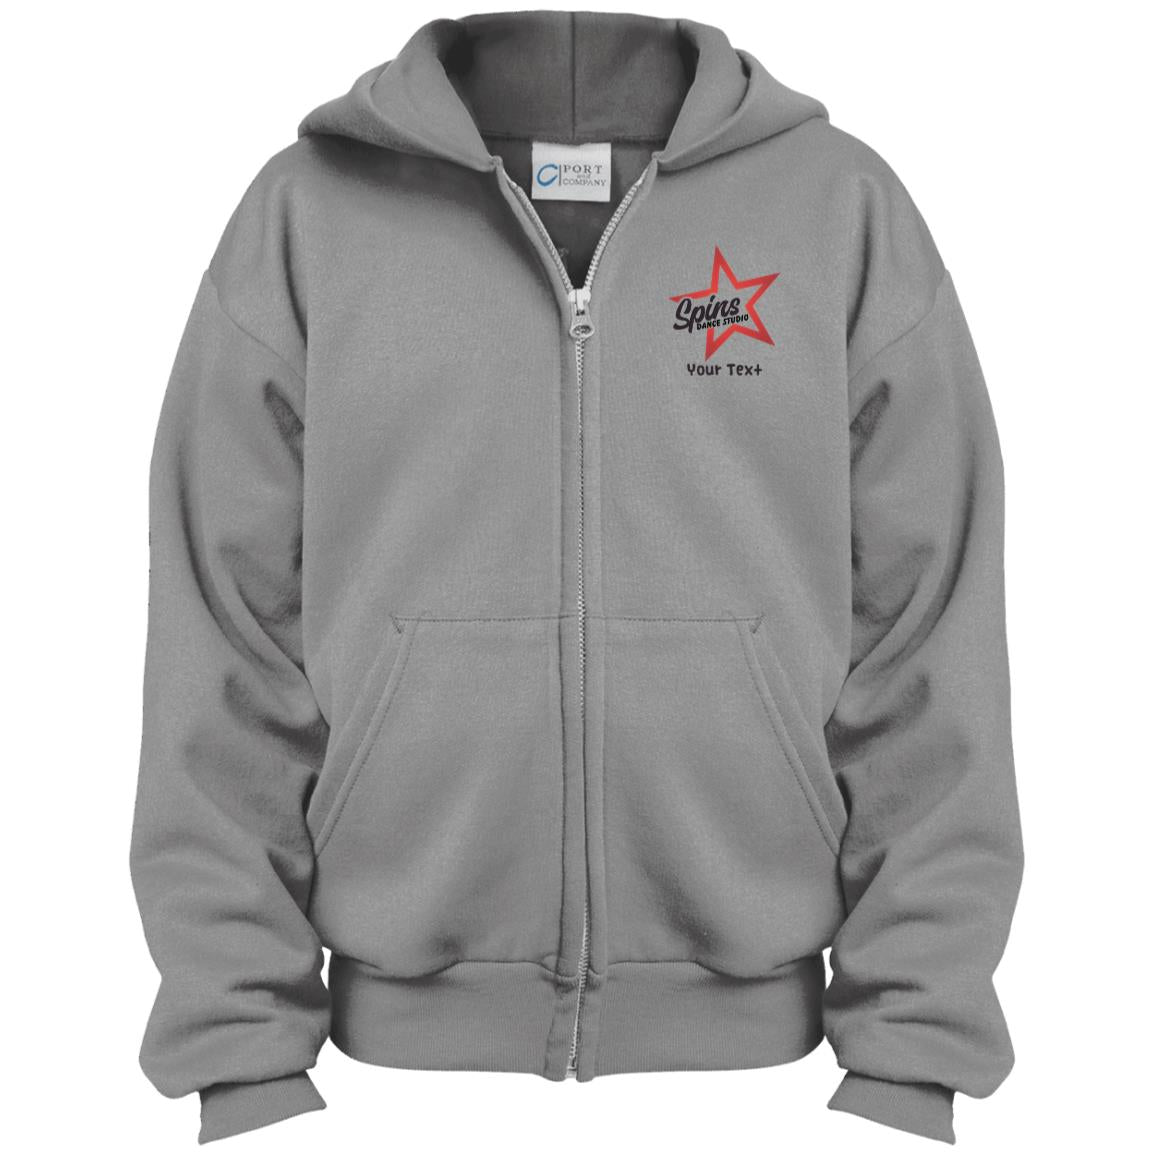 Spins Youth Full Zip Hoodie - With Personalization